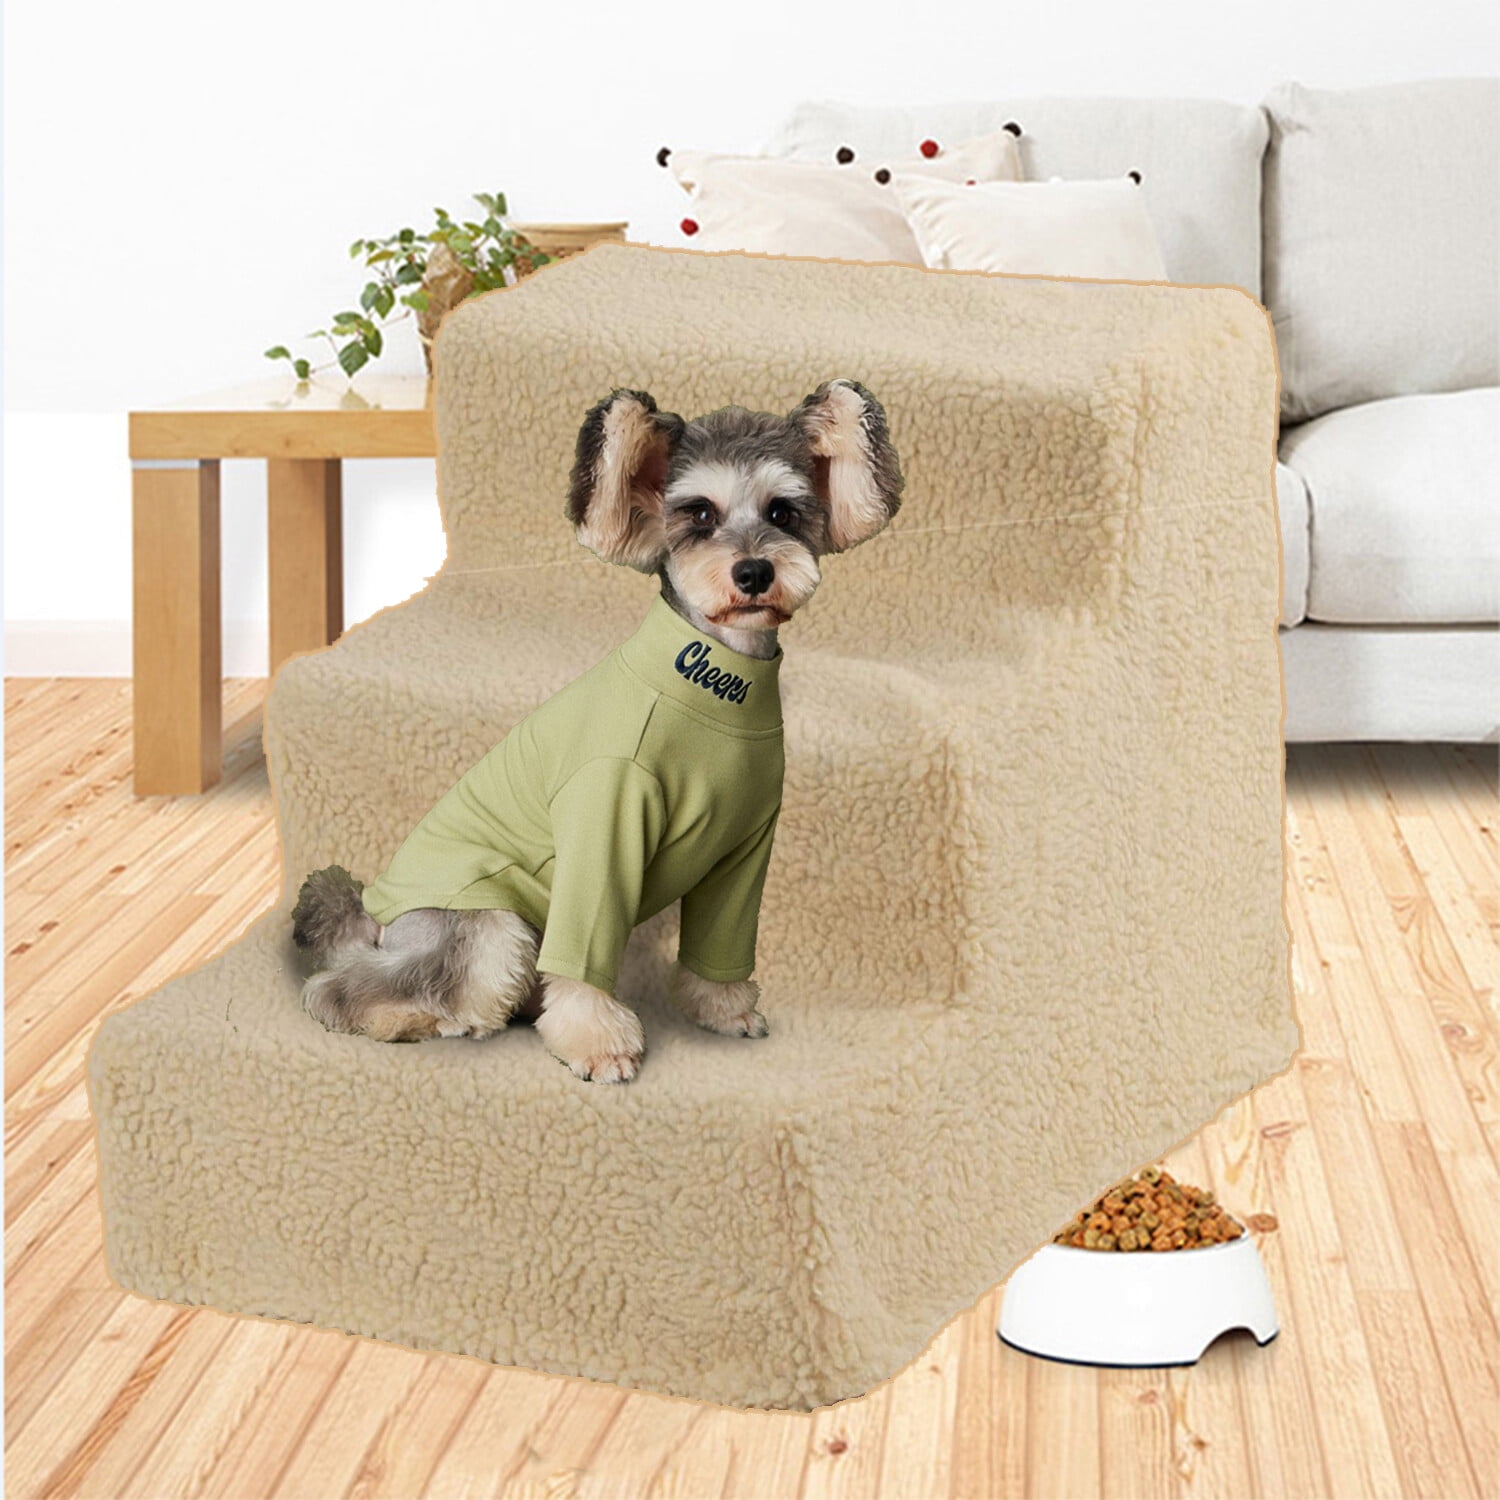 Ashui Pet Stairs Dog Steps 3 Steps Mesh Foldable Washable Anti Slip Bottom Dog Stairs Pet Bed Ladder for Dogs and Cats Bed Sofa